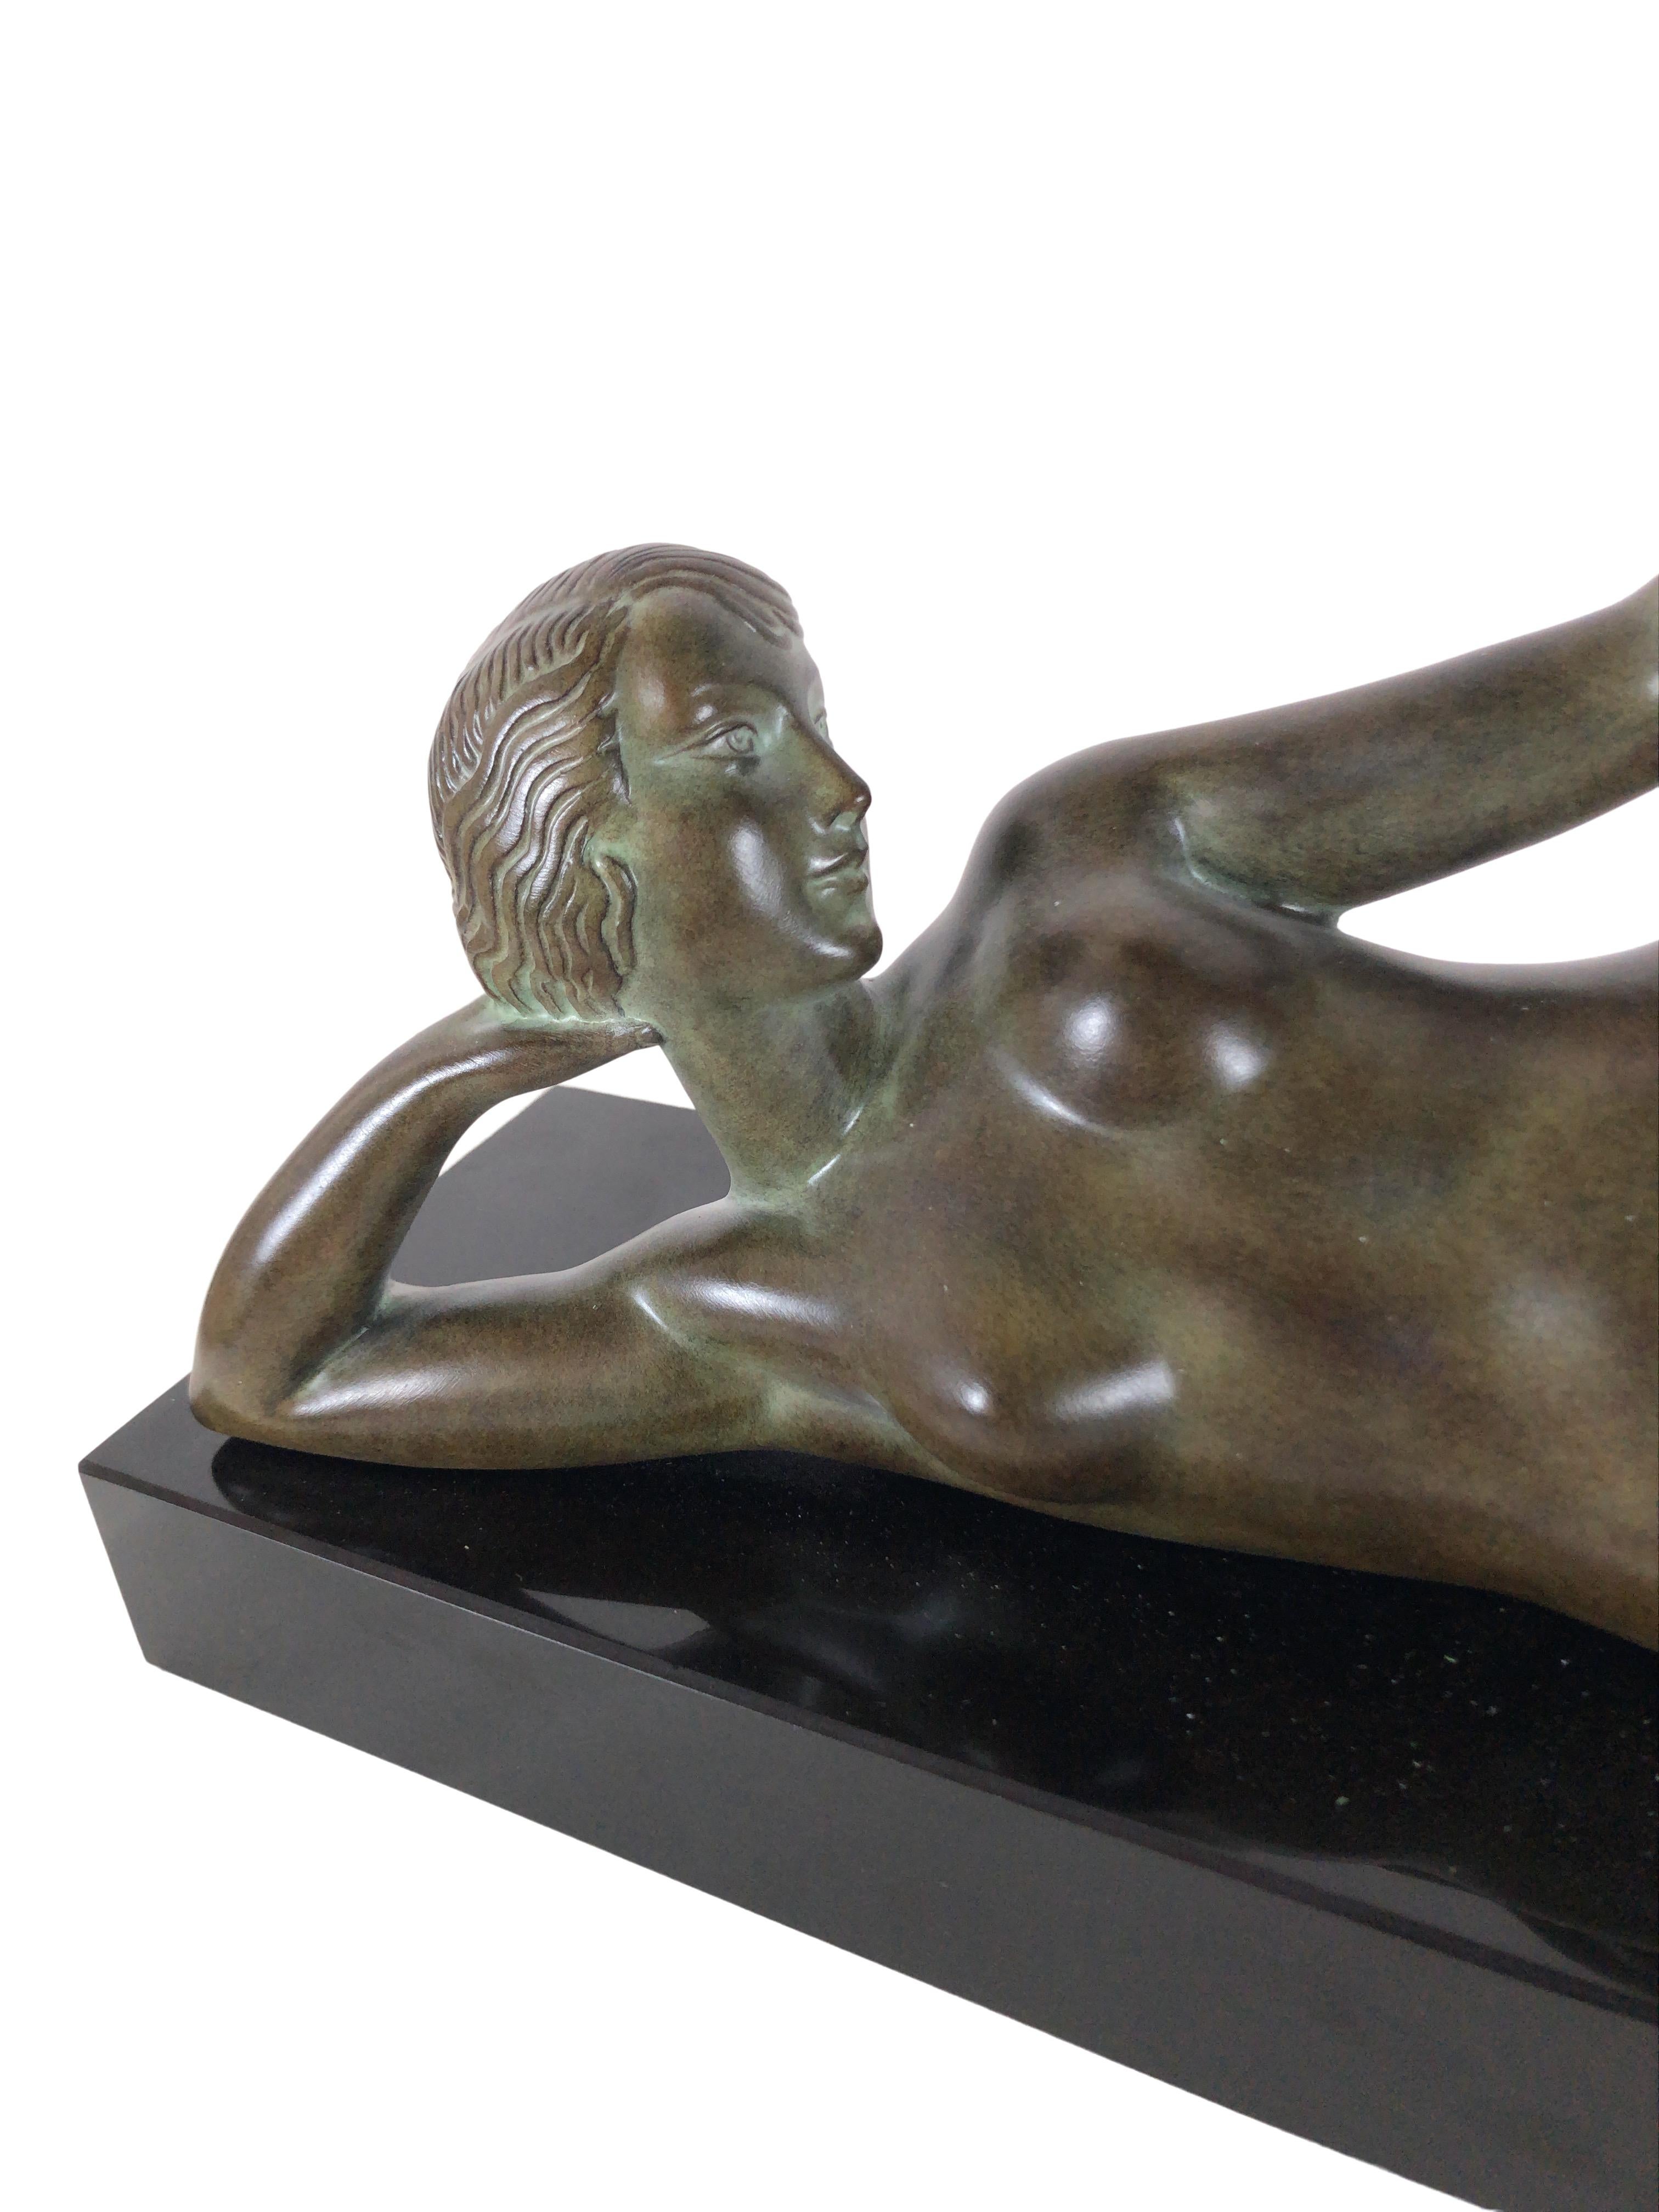 French Aube Art Deco Style Sculpture Lying Nude with Lighted Ball by Max Le Verrier For Sale